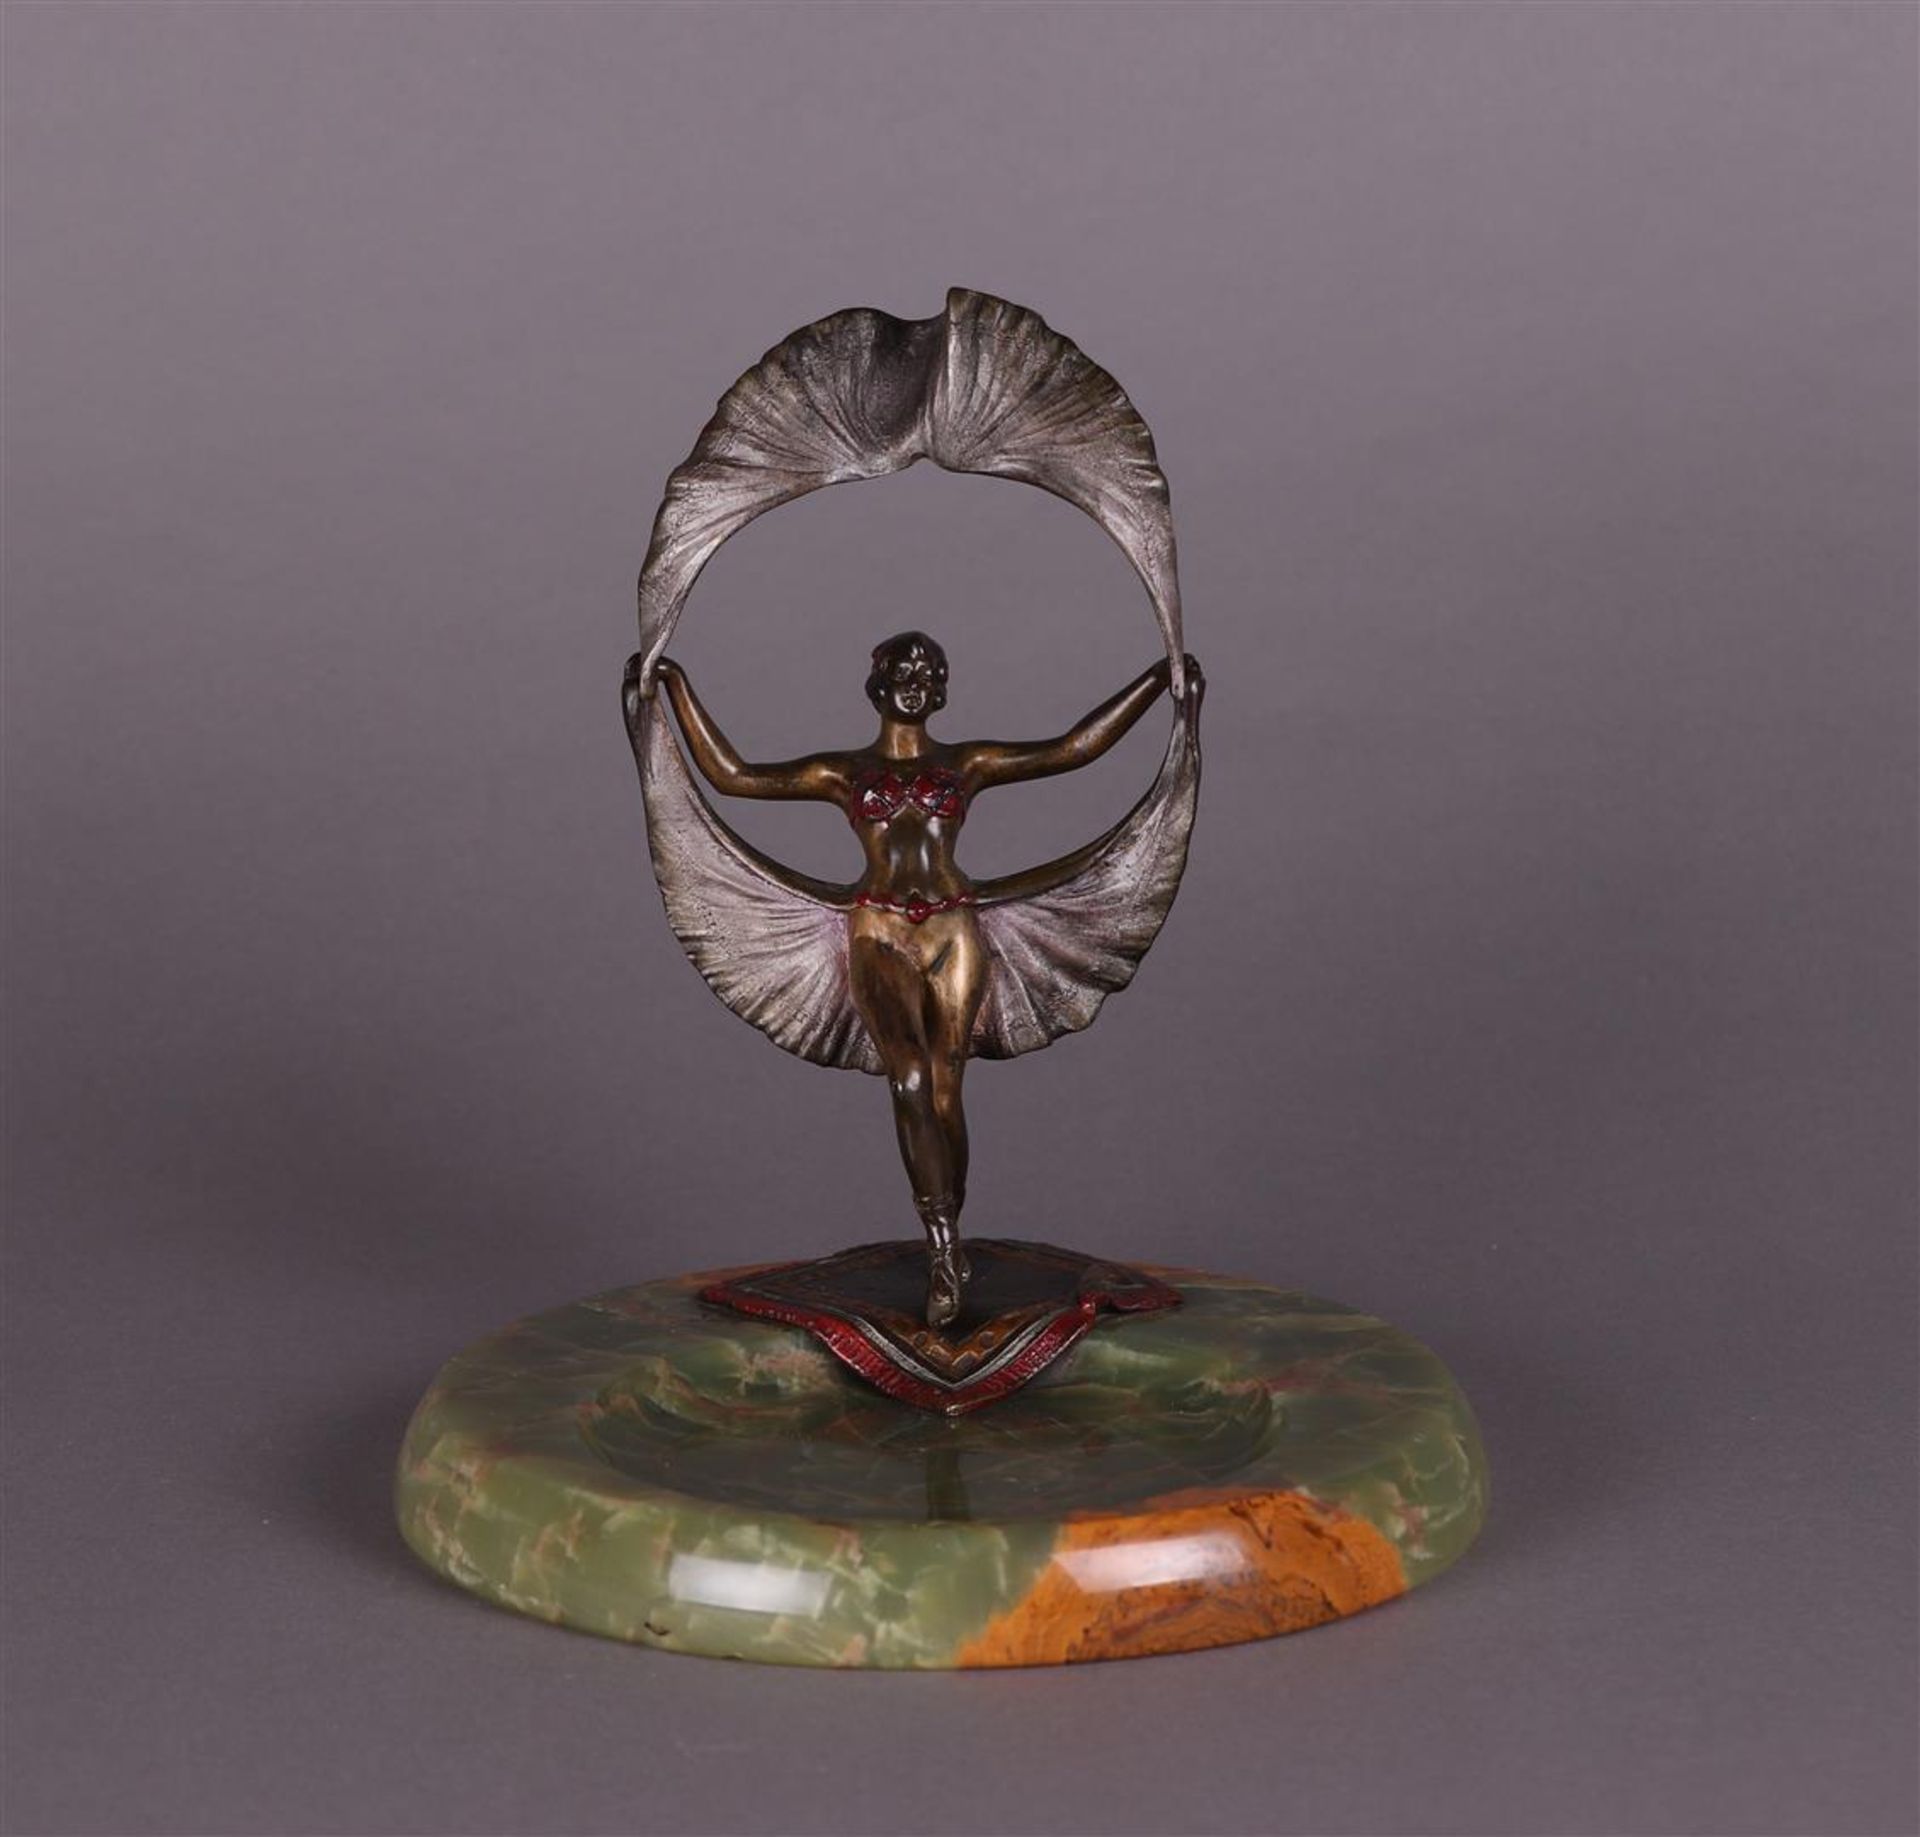 A cold-painted erotic "Viennese" bronze of a belly dancer on a marble dish (vide poche). Marked "Aus - Bild 2 aus 3